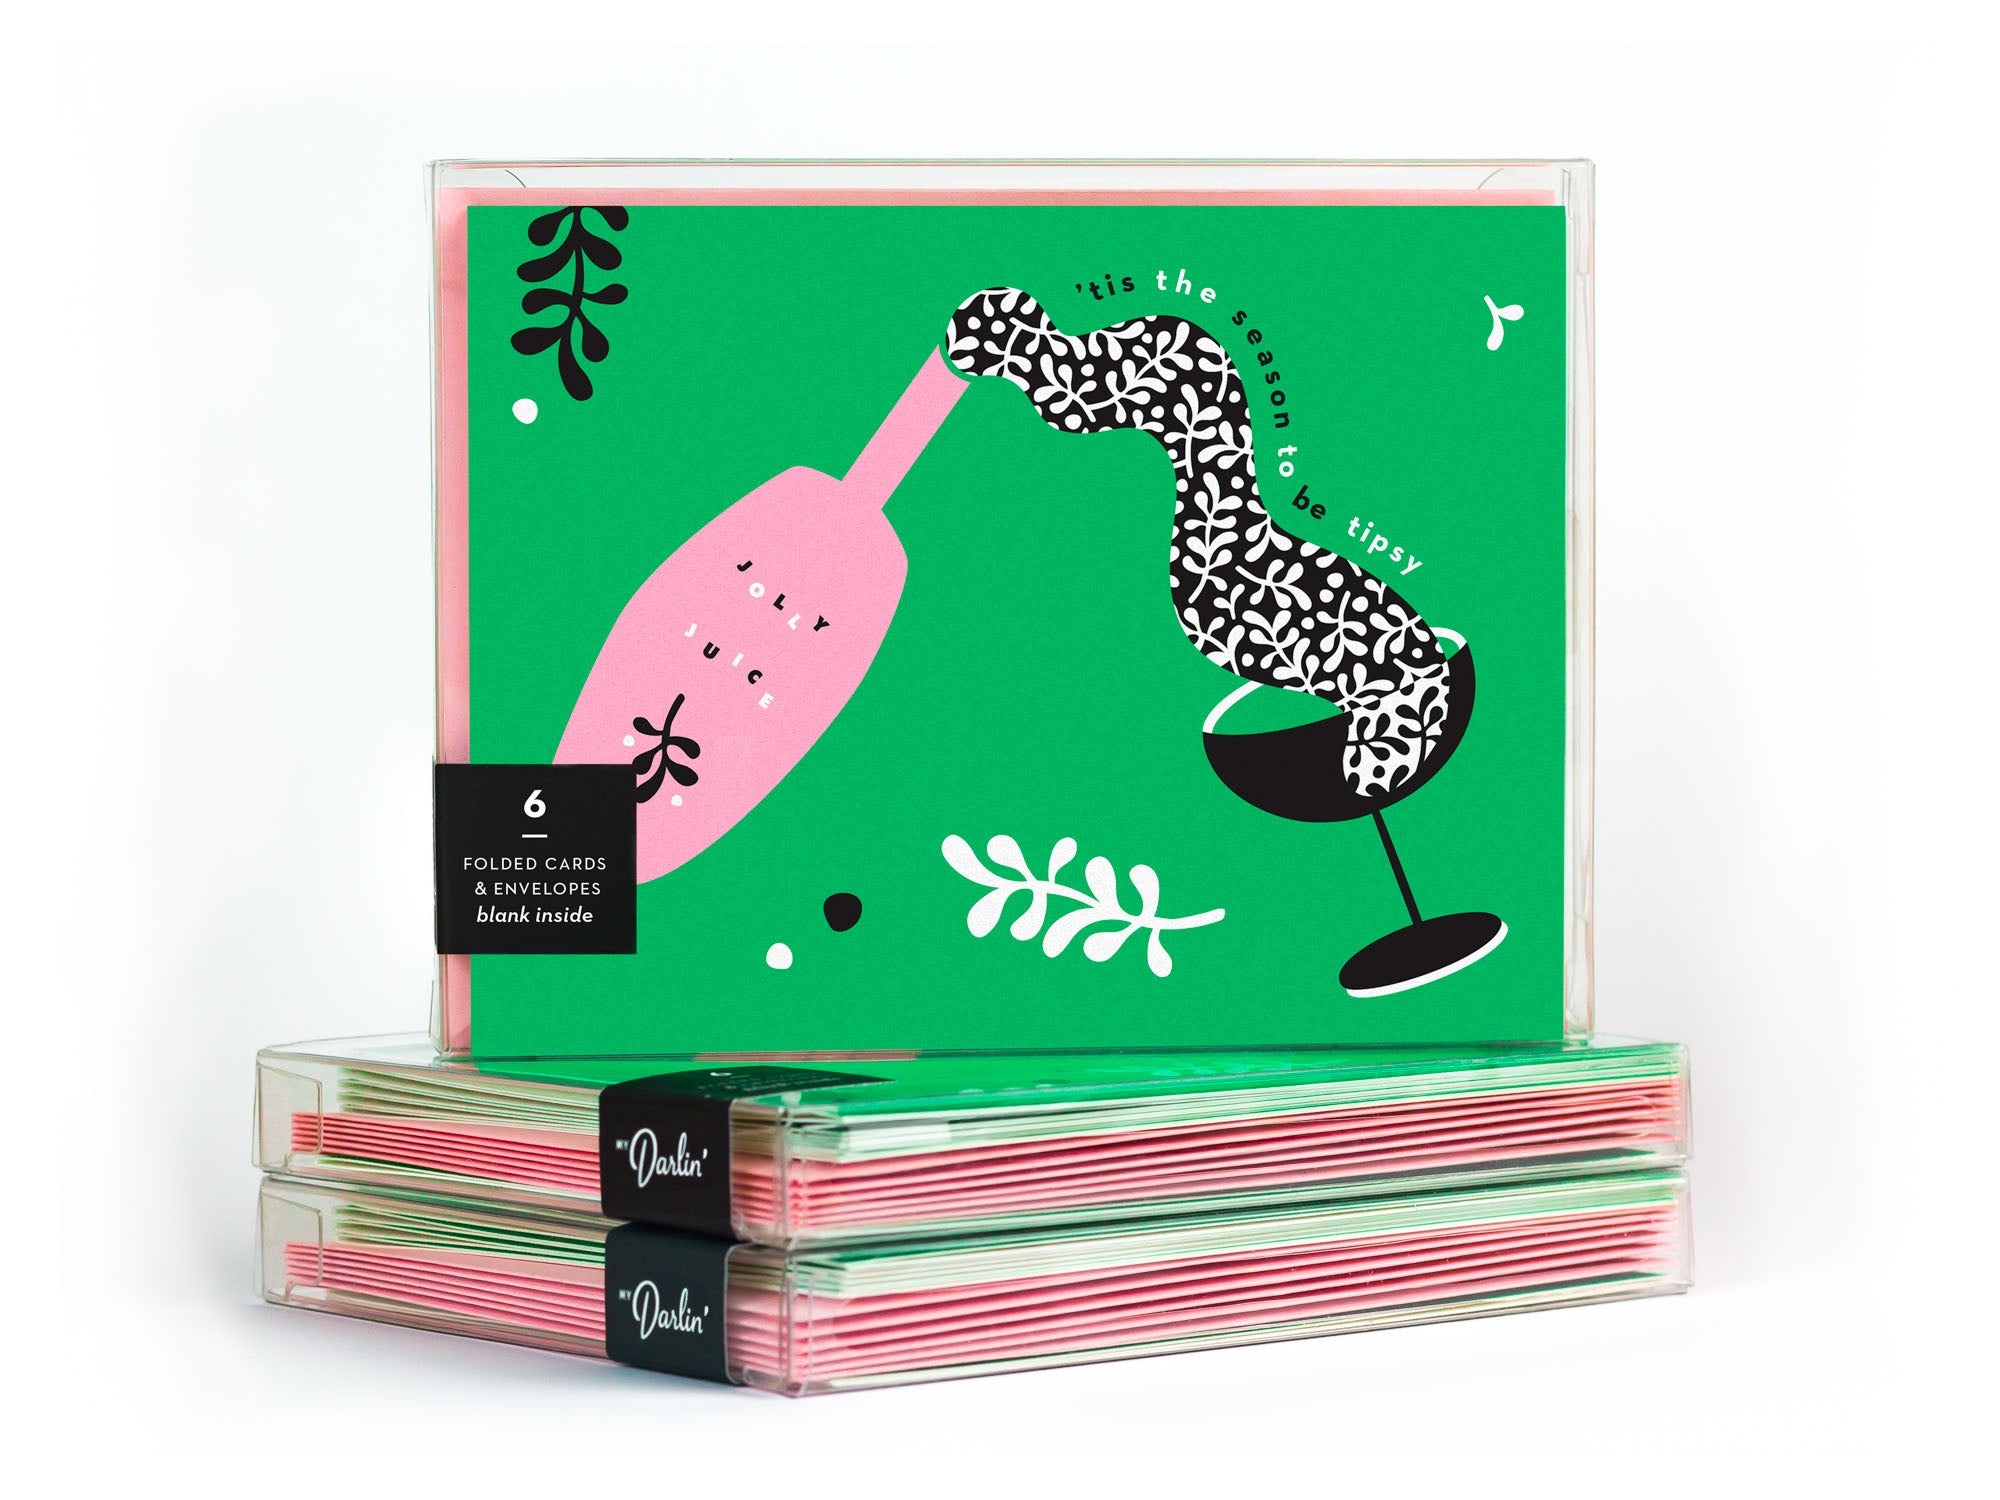 Tis the Season to Be Tipsy Holiday Card Boxed Set, collaboration between Etsy and Match.com. Designed by @mydarlin_bk